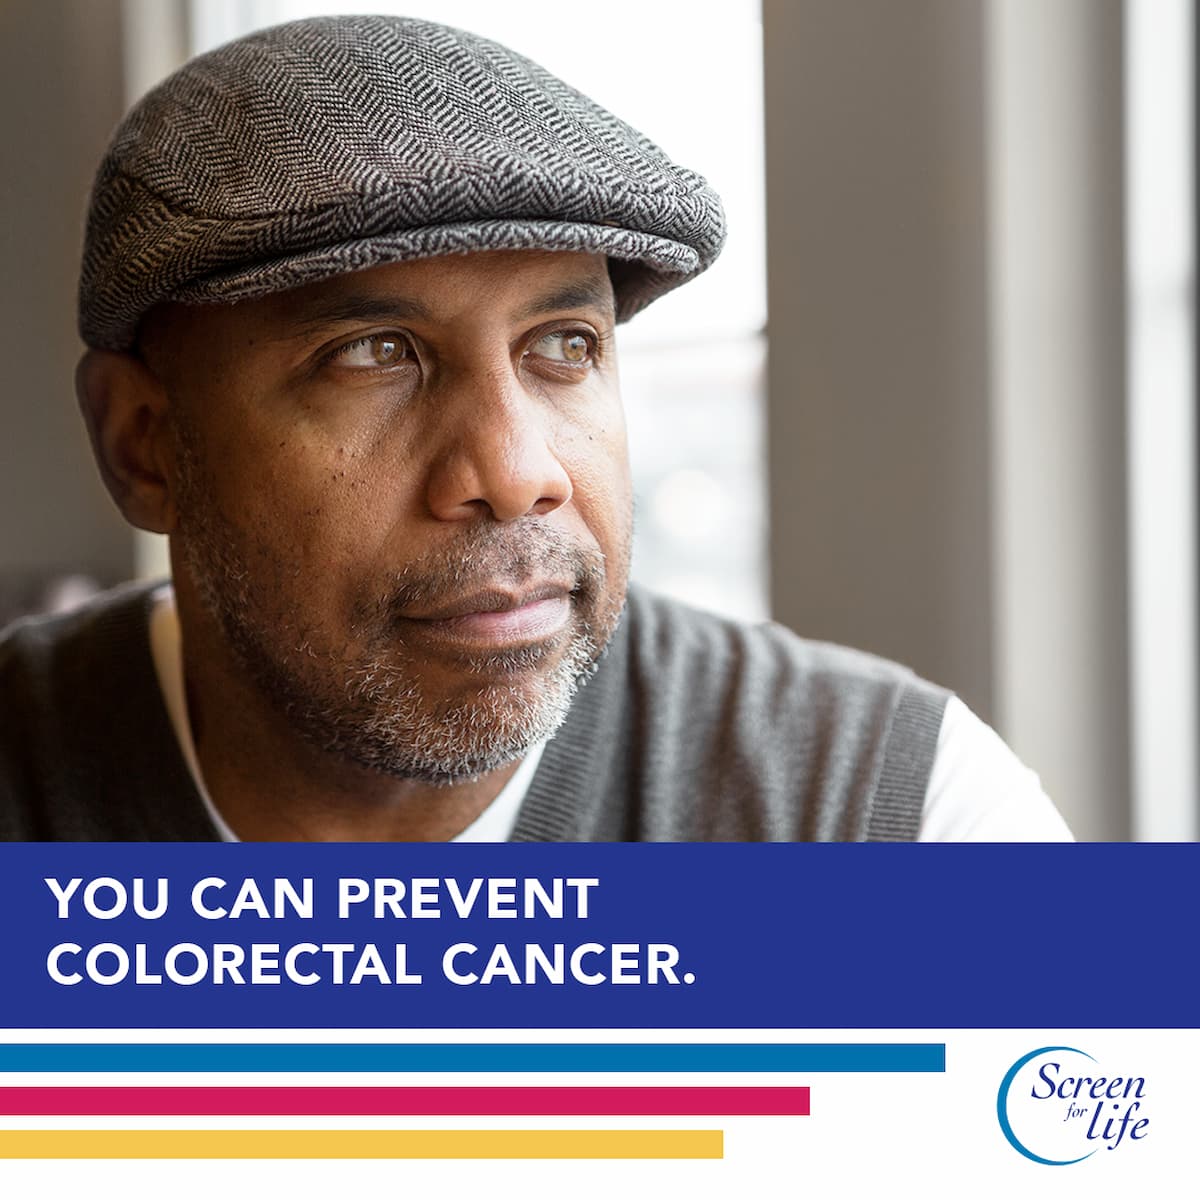 You can prevent colorectal cancer.